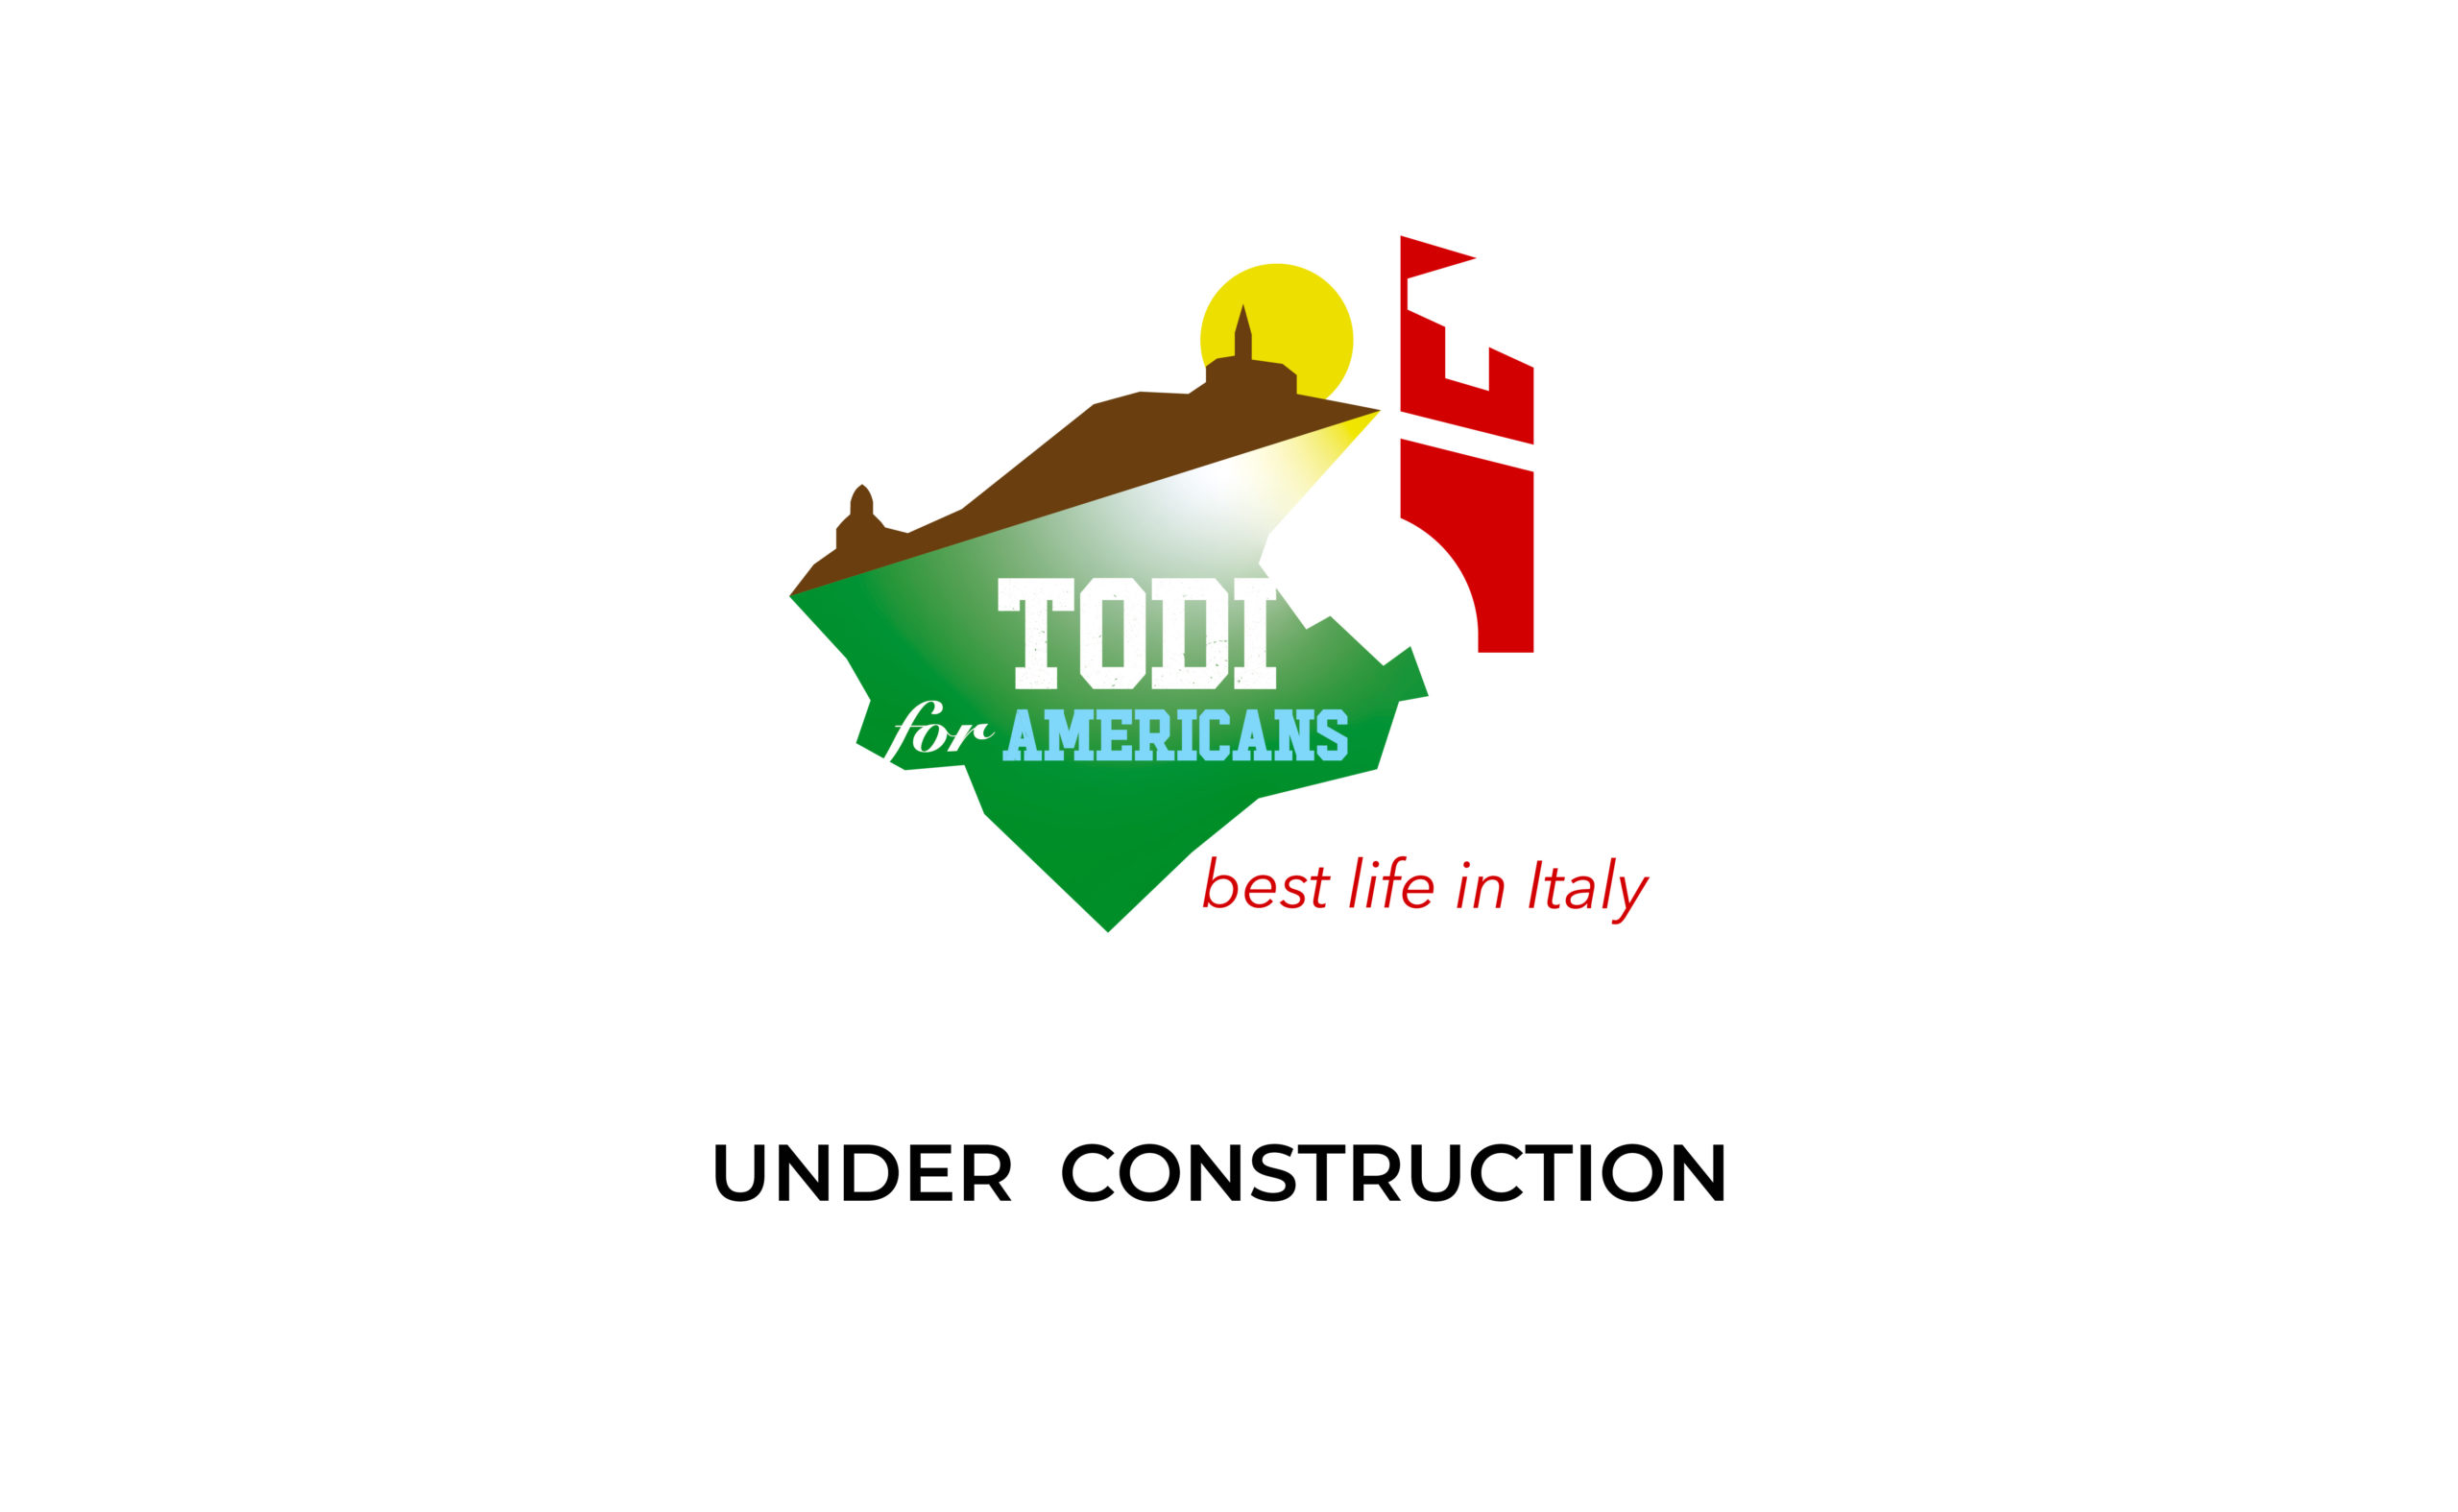 Todi for Americans